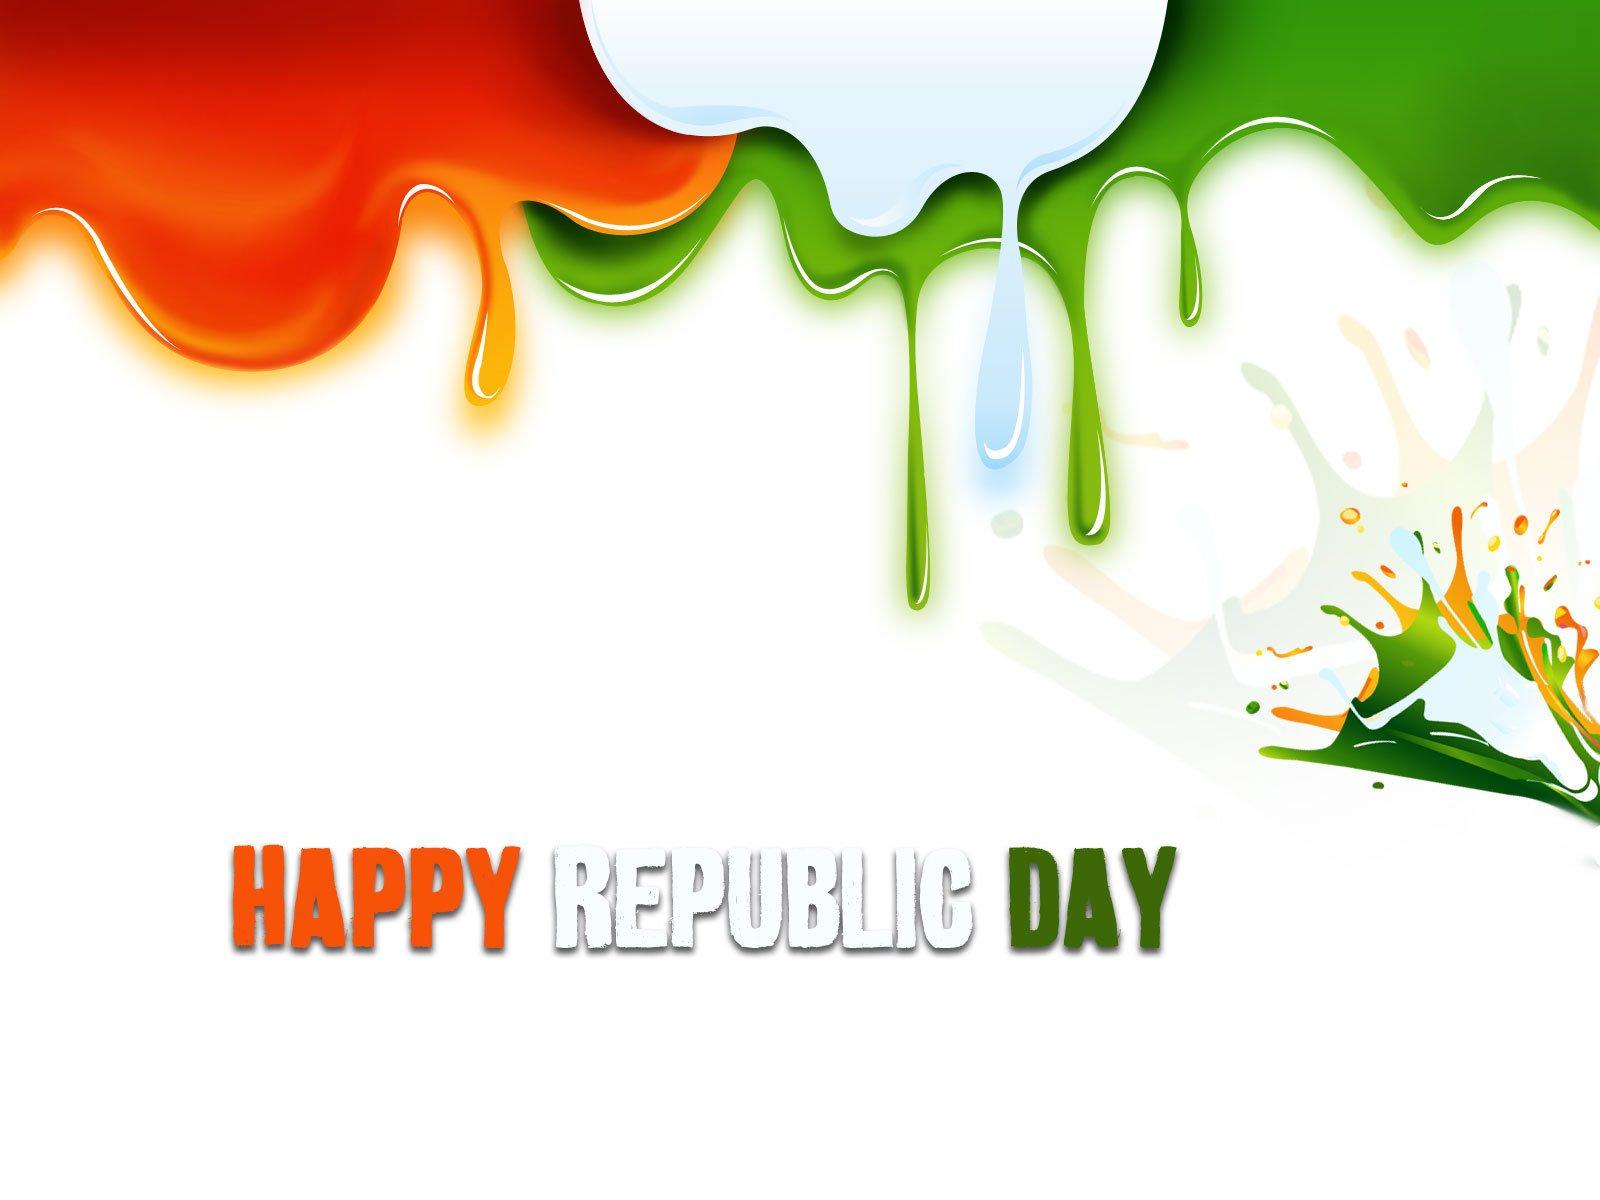 Republic Day Picture, Image, Graphics and Comments